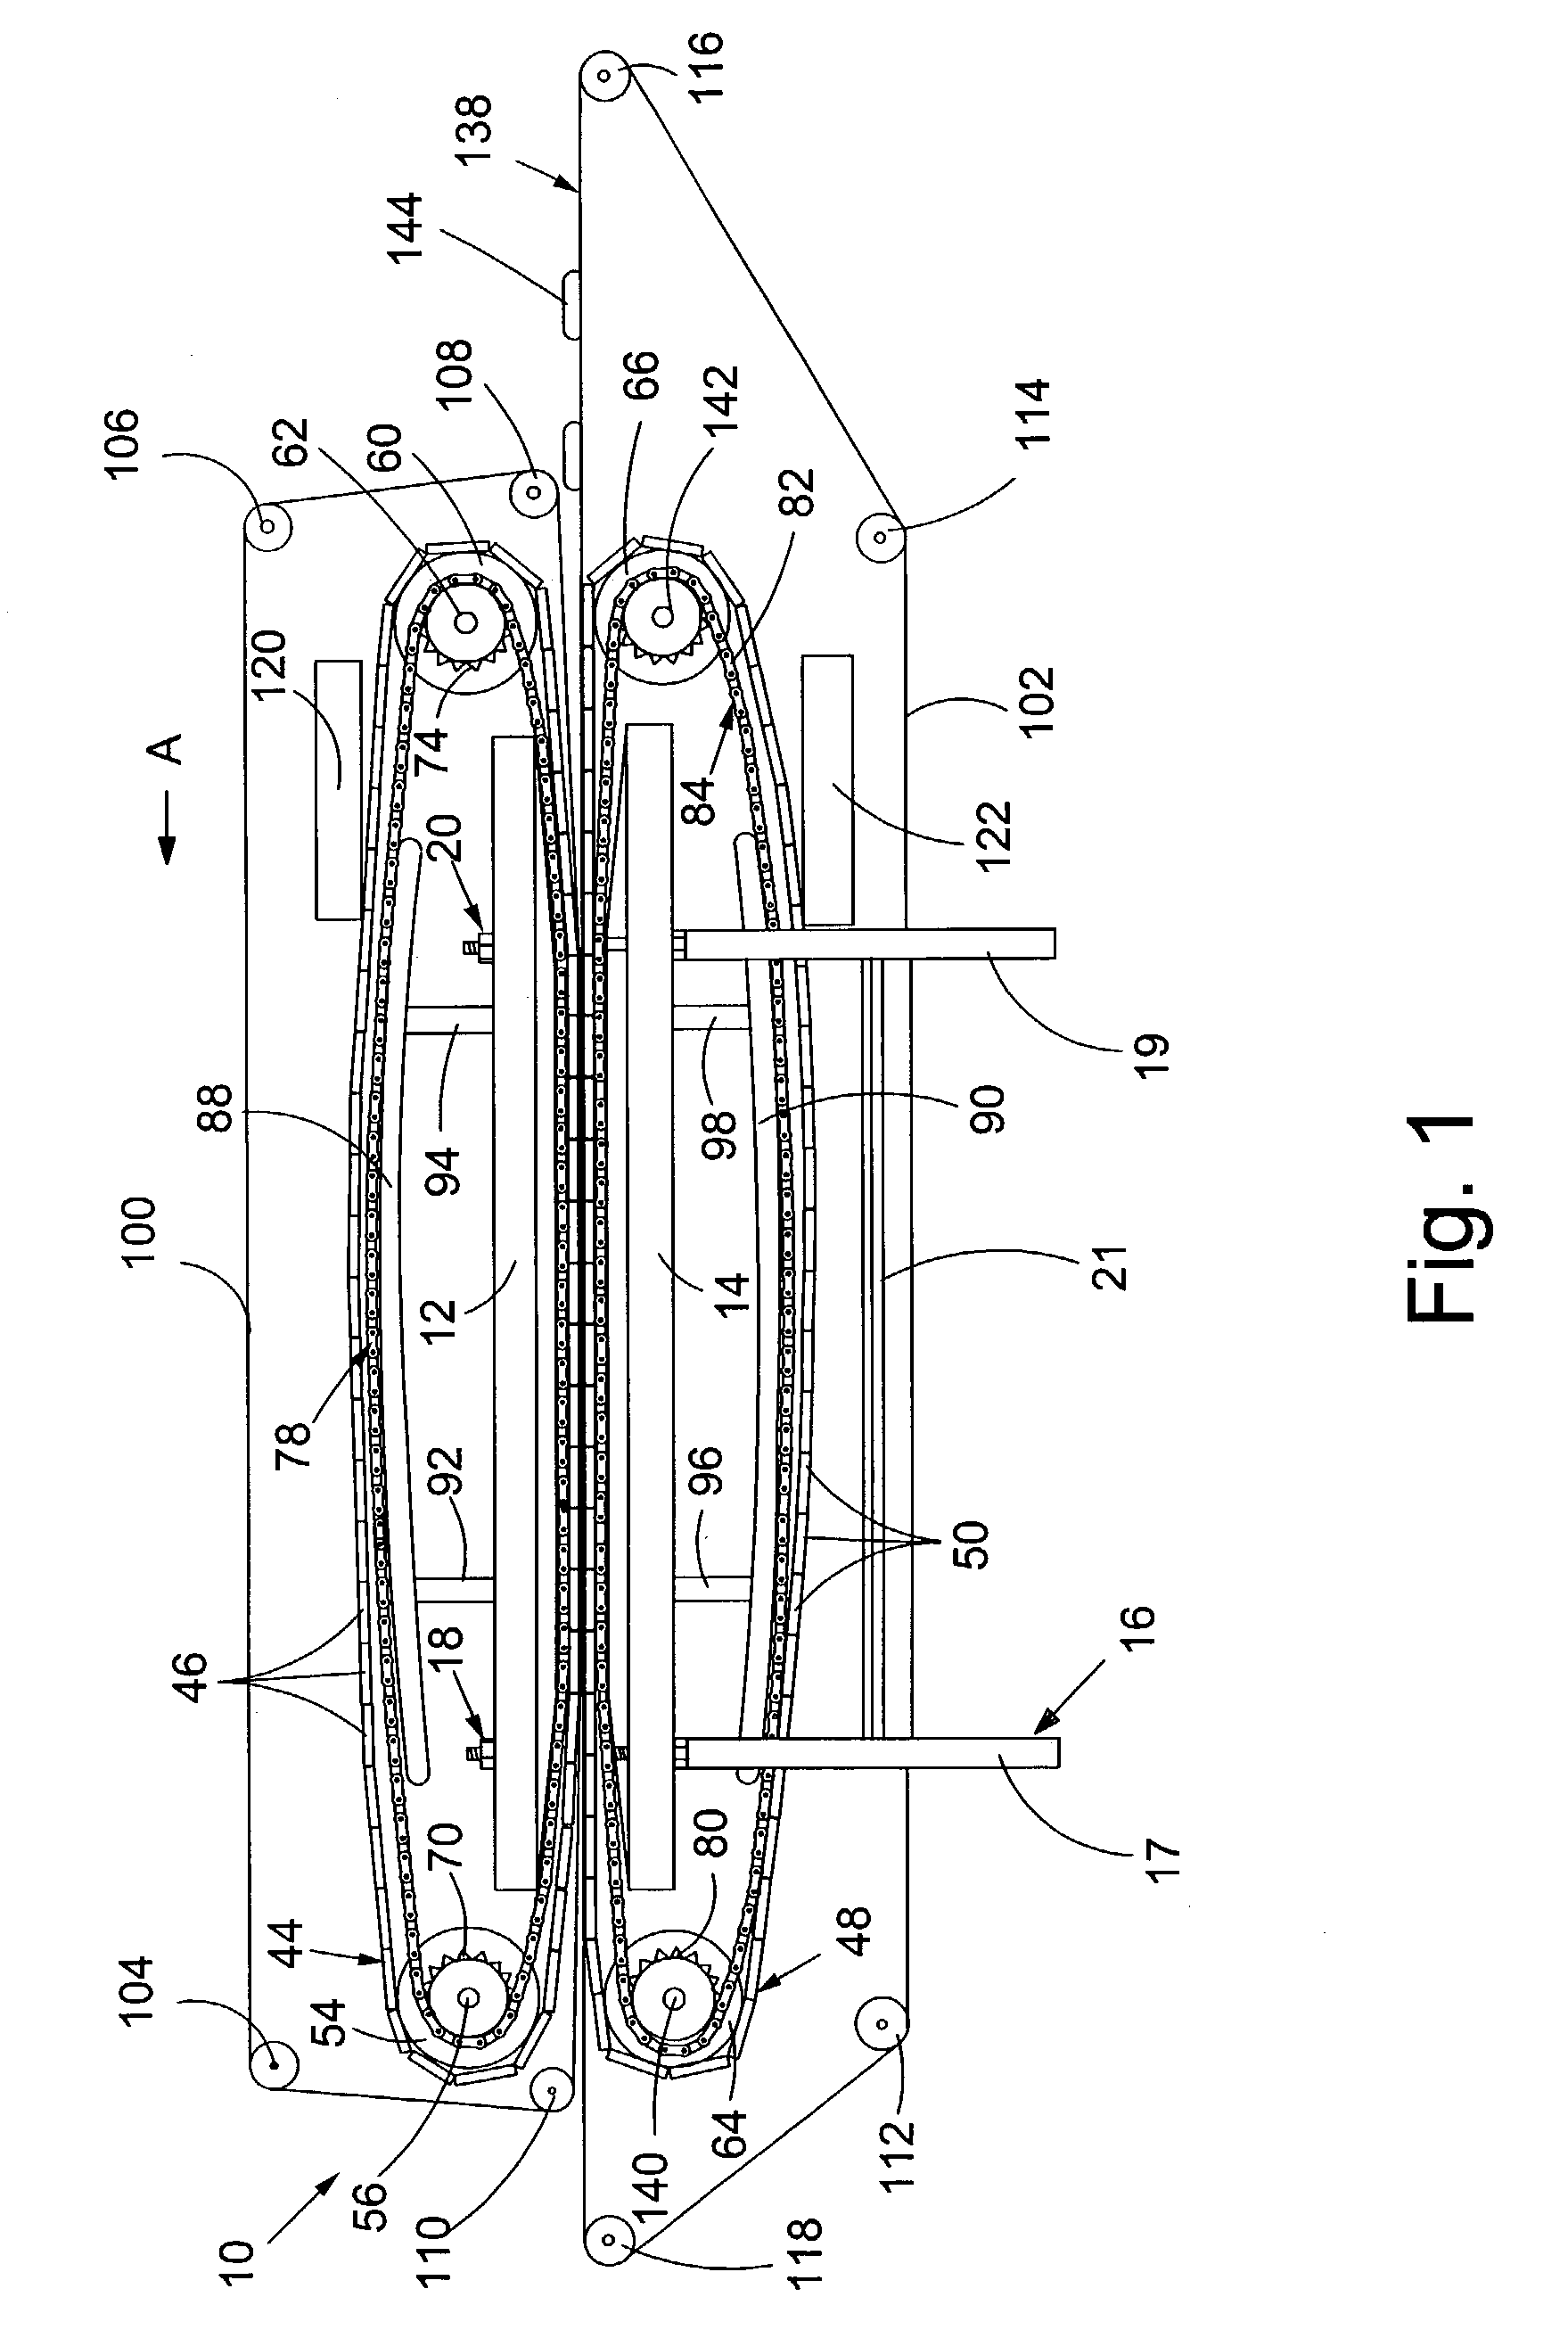 Apparatus and method for forming food products by gradual compression